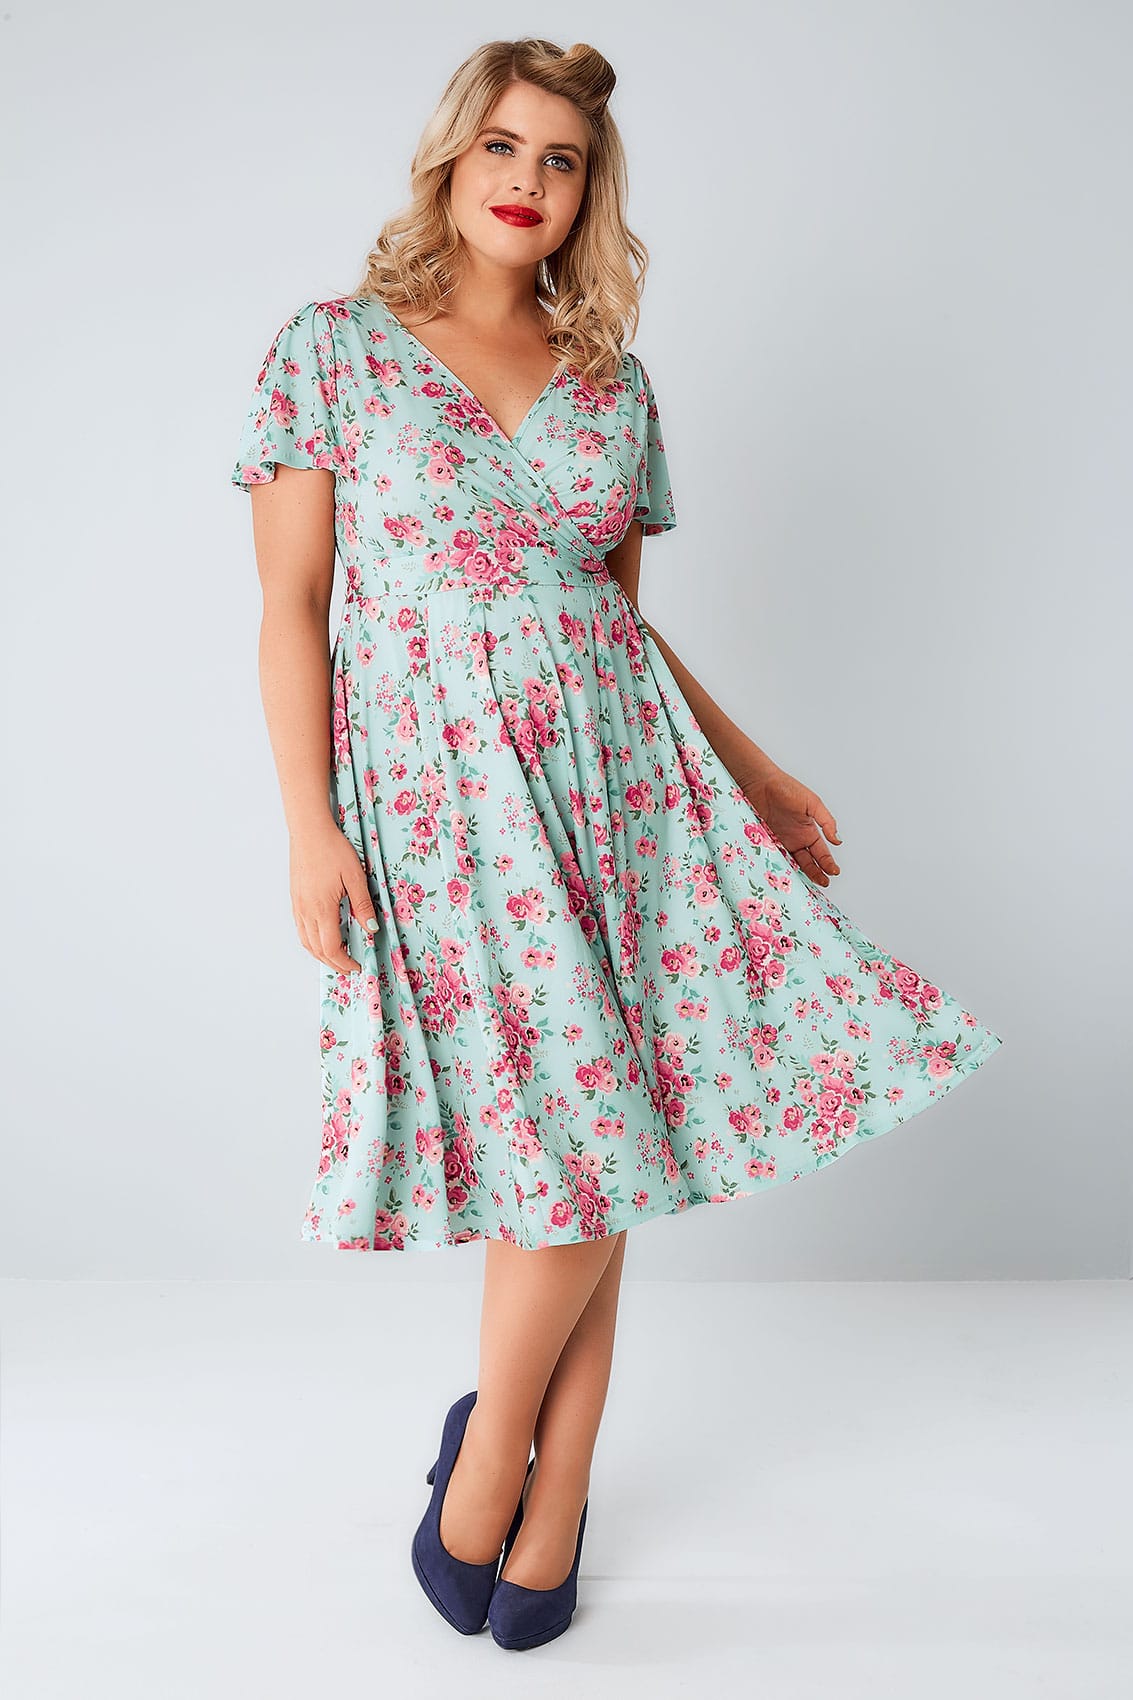 LADY VOLUPTUOUS Mint & Pink Ditsy Floral Lyra Dress plus size 16 to 32